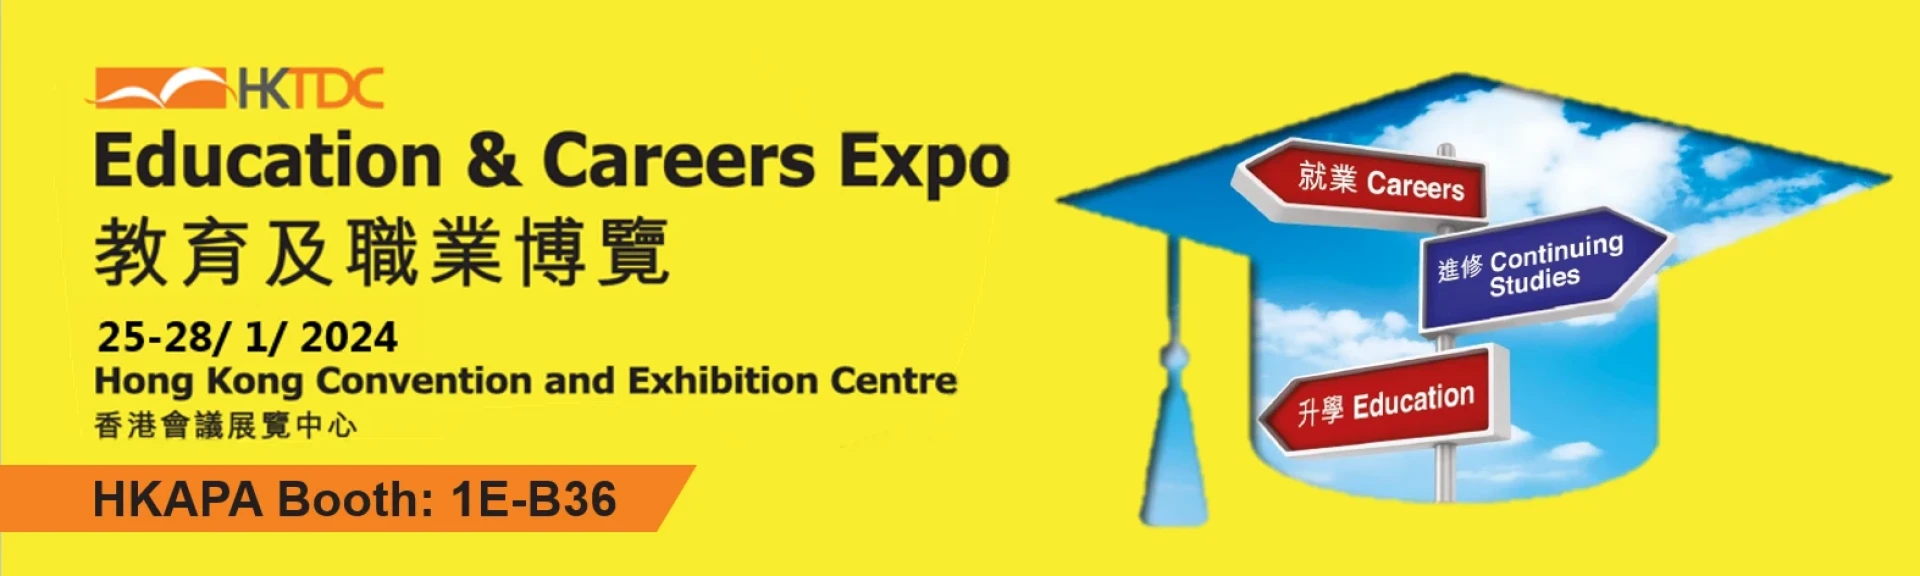 Learn More About Art Tech and Performing Arts at HKTDC Education and Career Expo